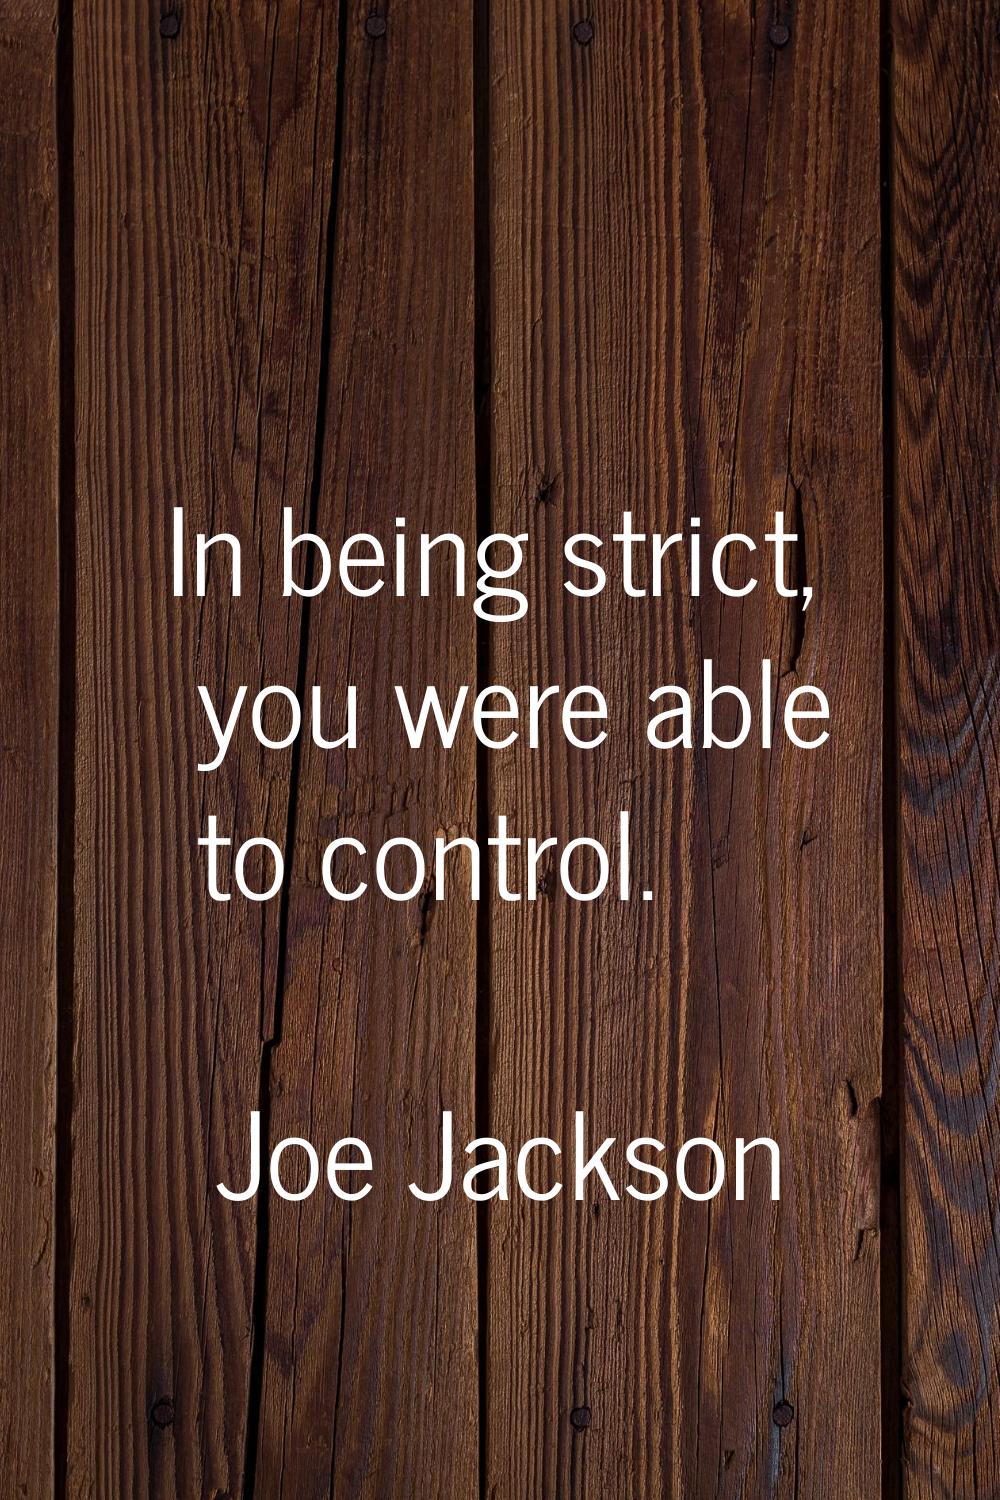 In being strict, you were able to control.